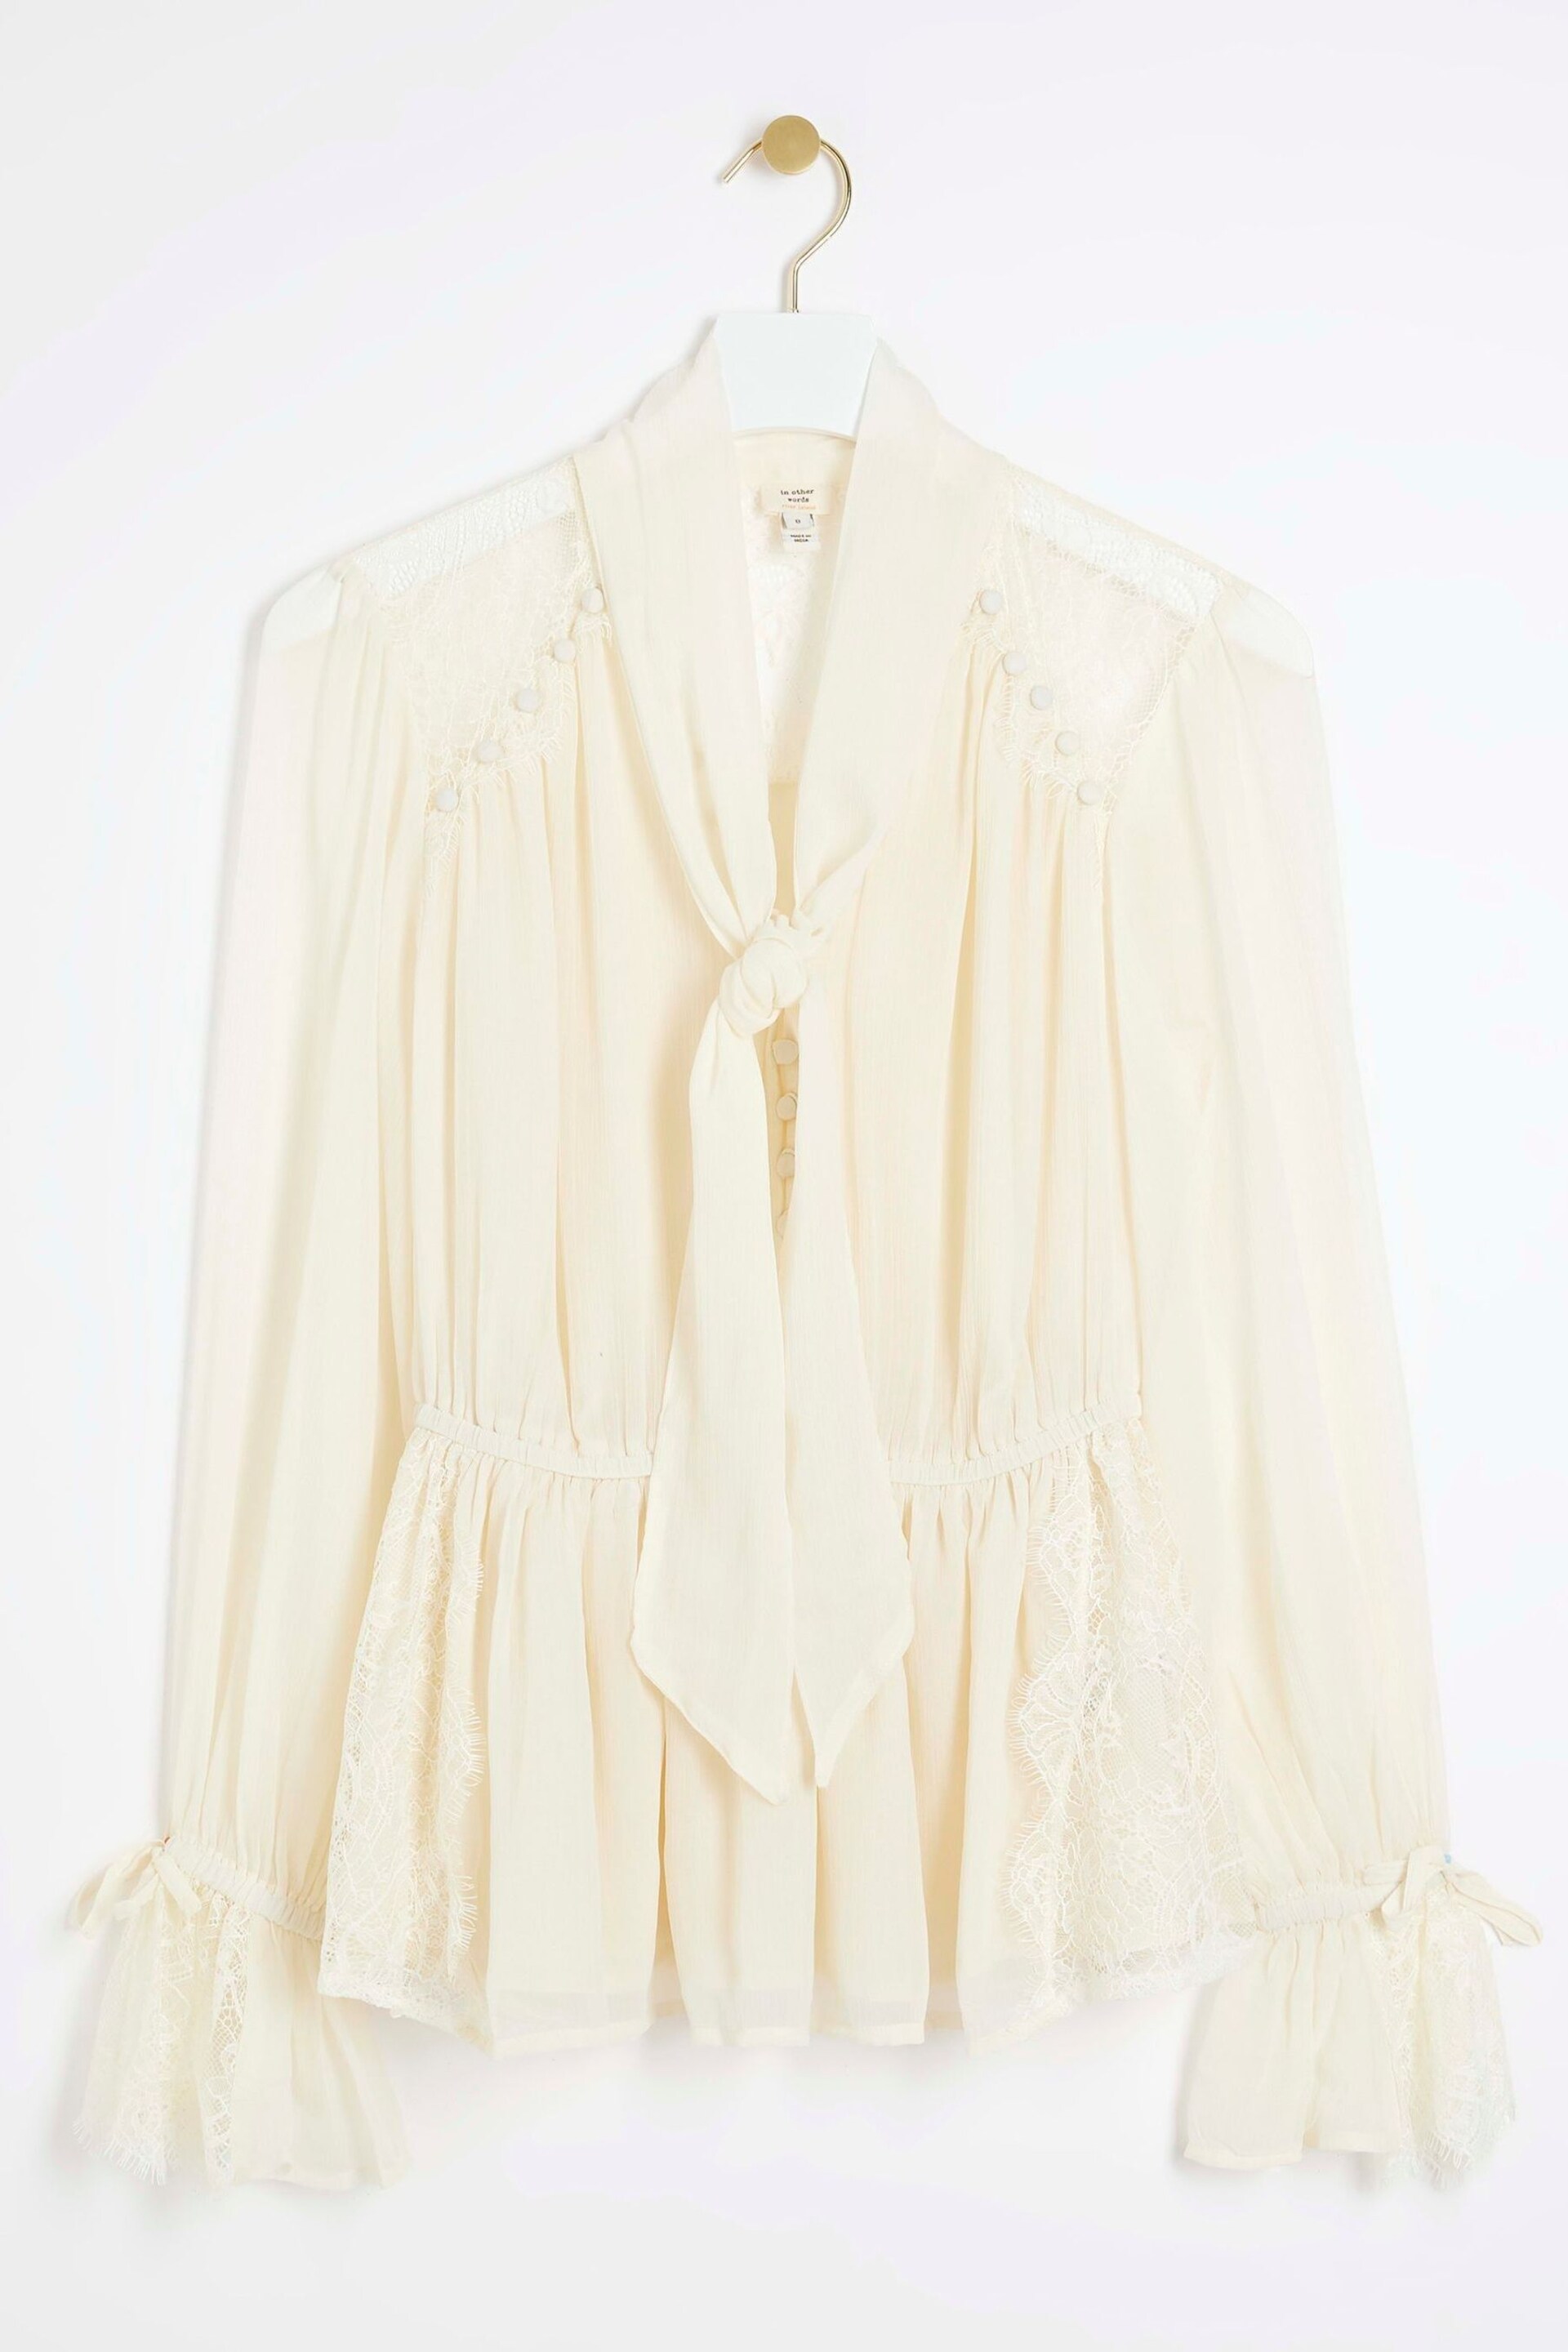 River Island Cream Lace Mix Pussy Bow Blouse - Image 3 of 4